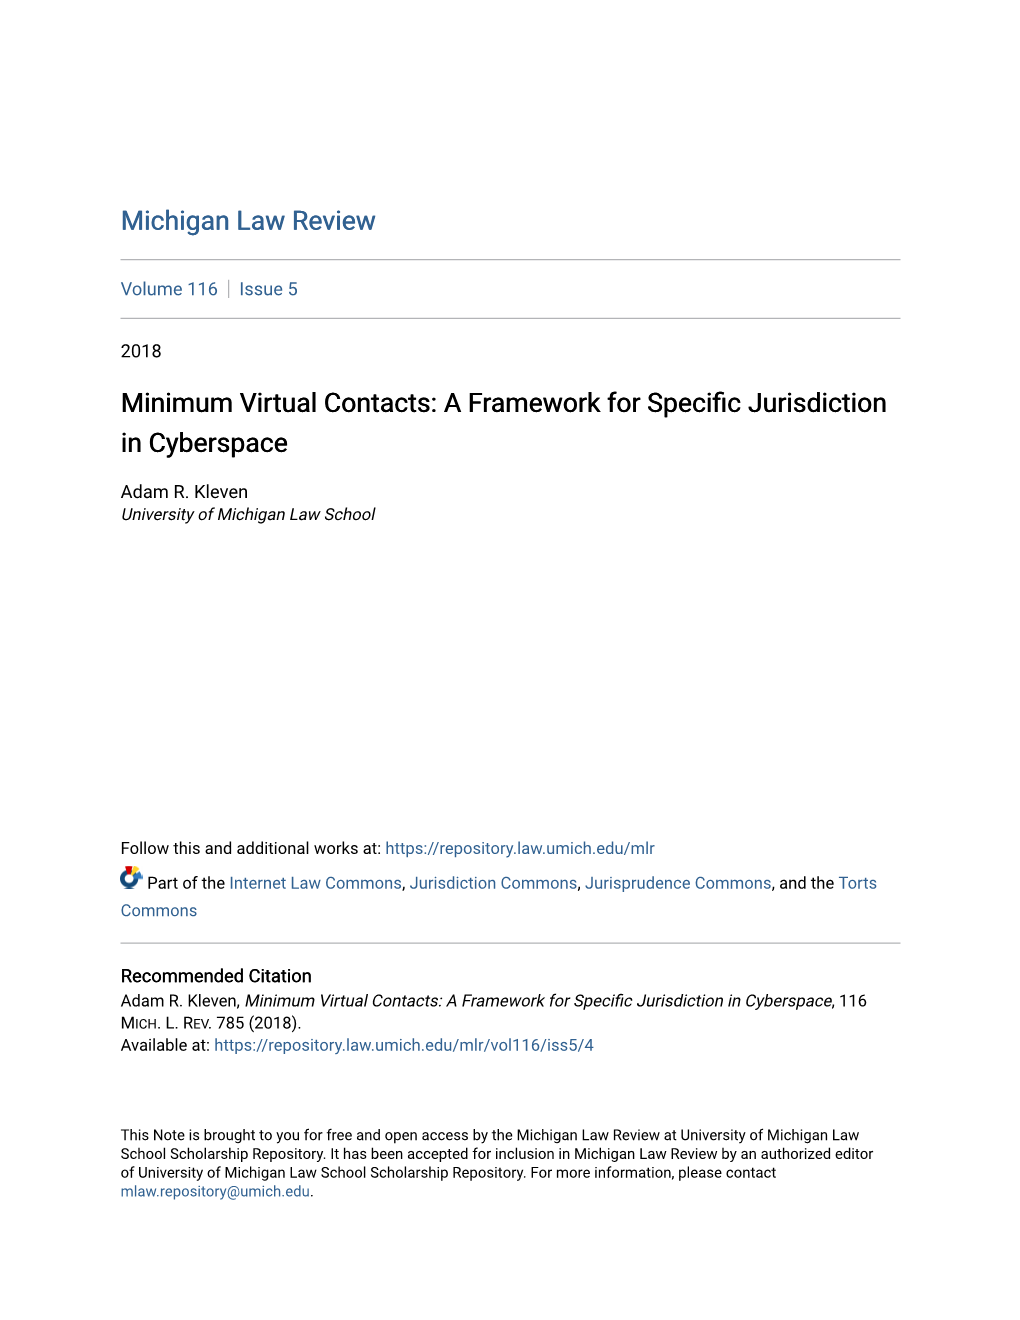 Minimum Virtual Contacts: a Framework for Specific Jurisdiction in Cyberspace